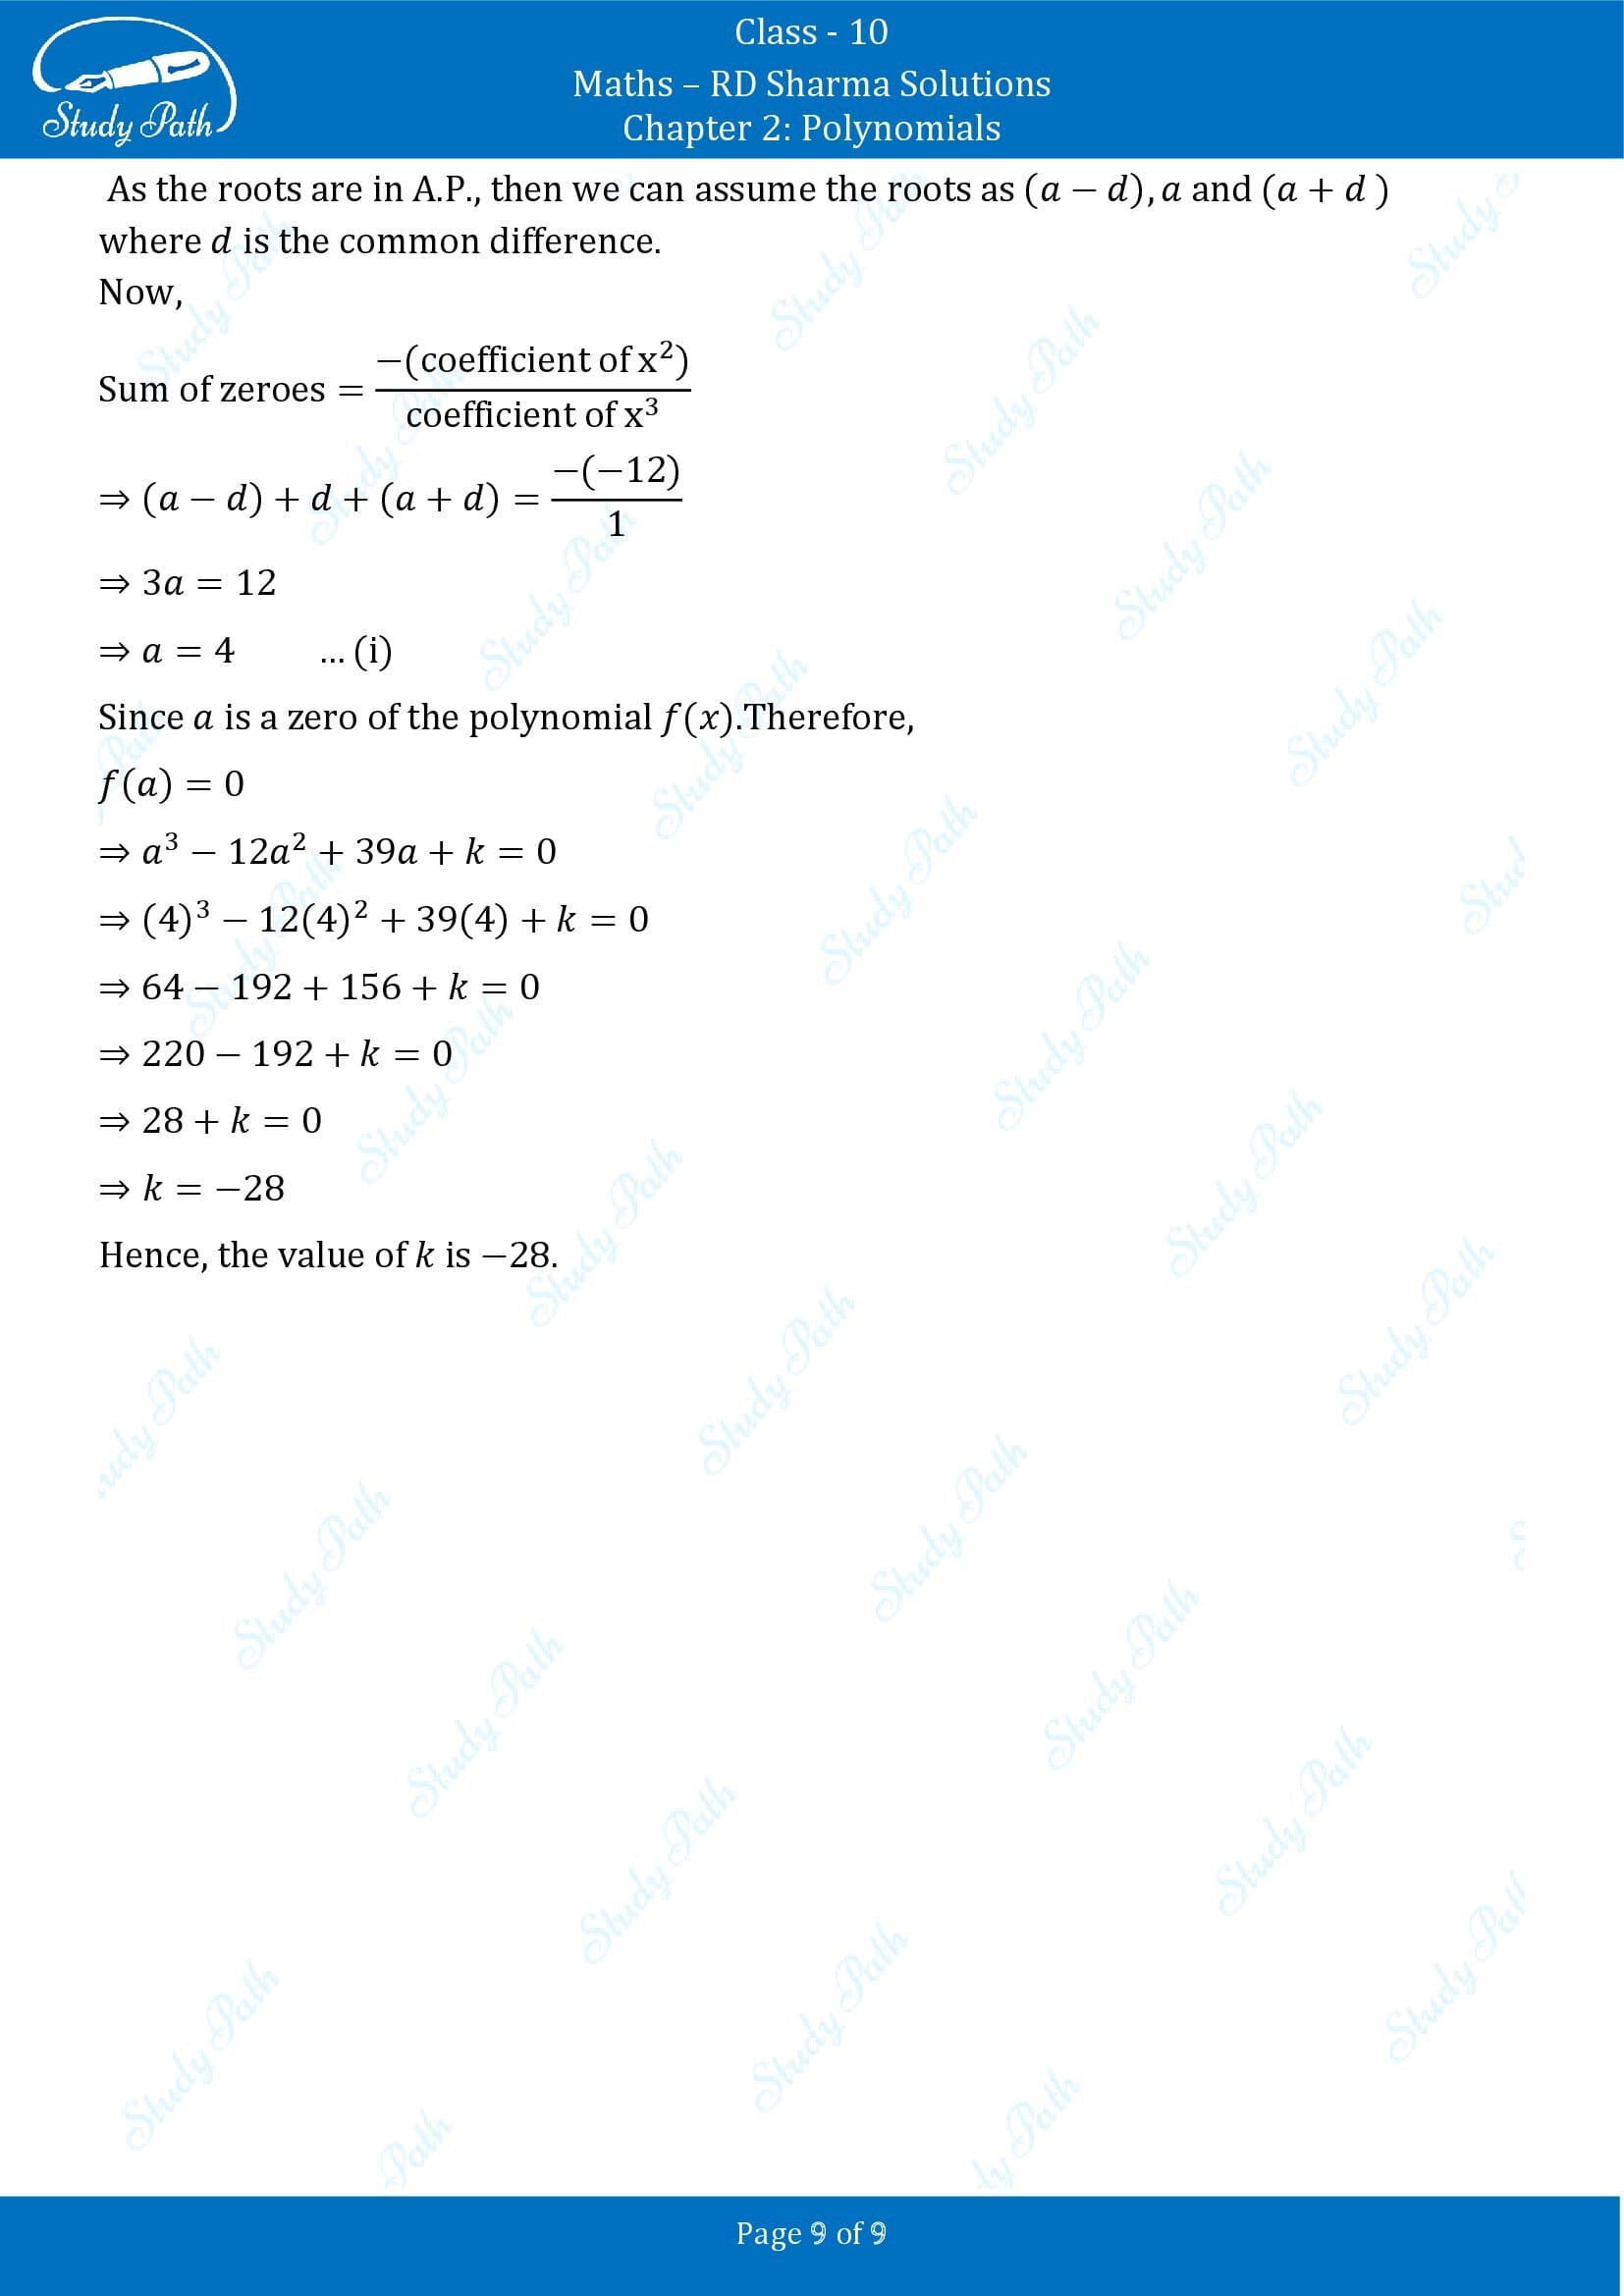 RD Sharma Solutions Class 10 Chapter 2 Polynomials Exercise 2.2 00009